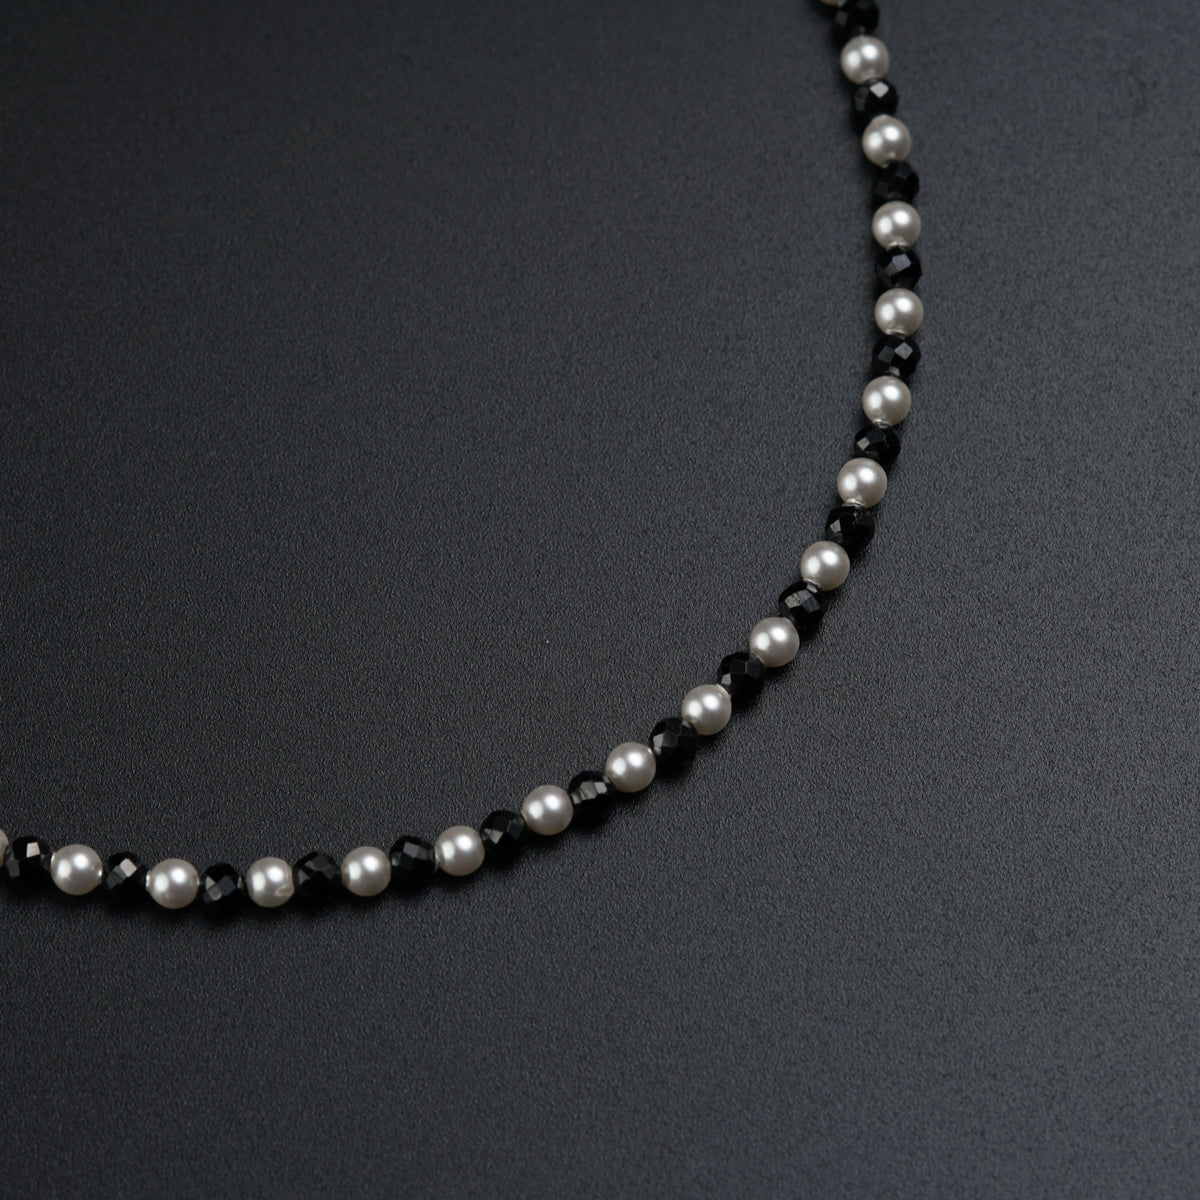 a black and white beaded necklace on a black surface